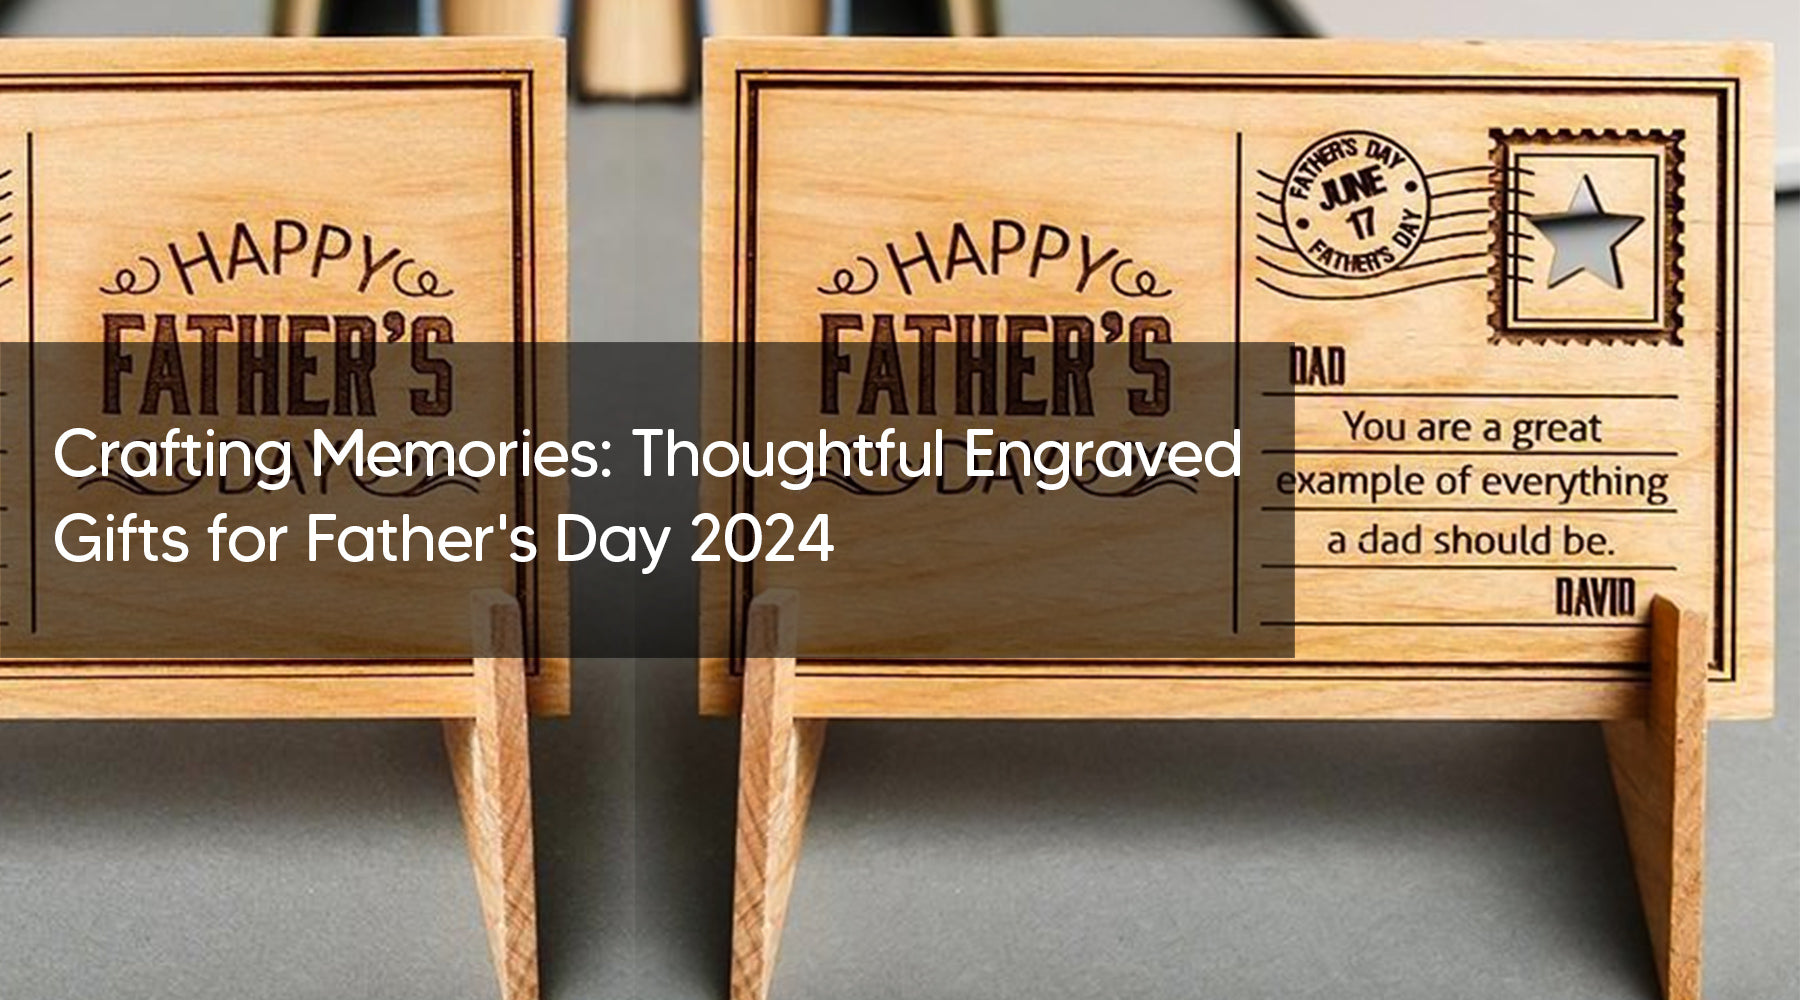 Crafting Memories: Thoughtful Engraved Gifts for Father's Day 2024